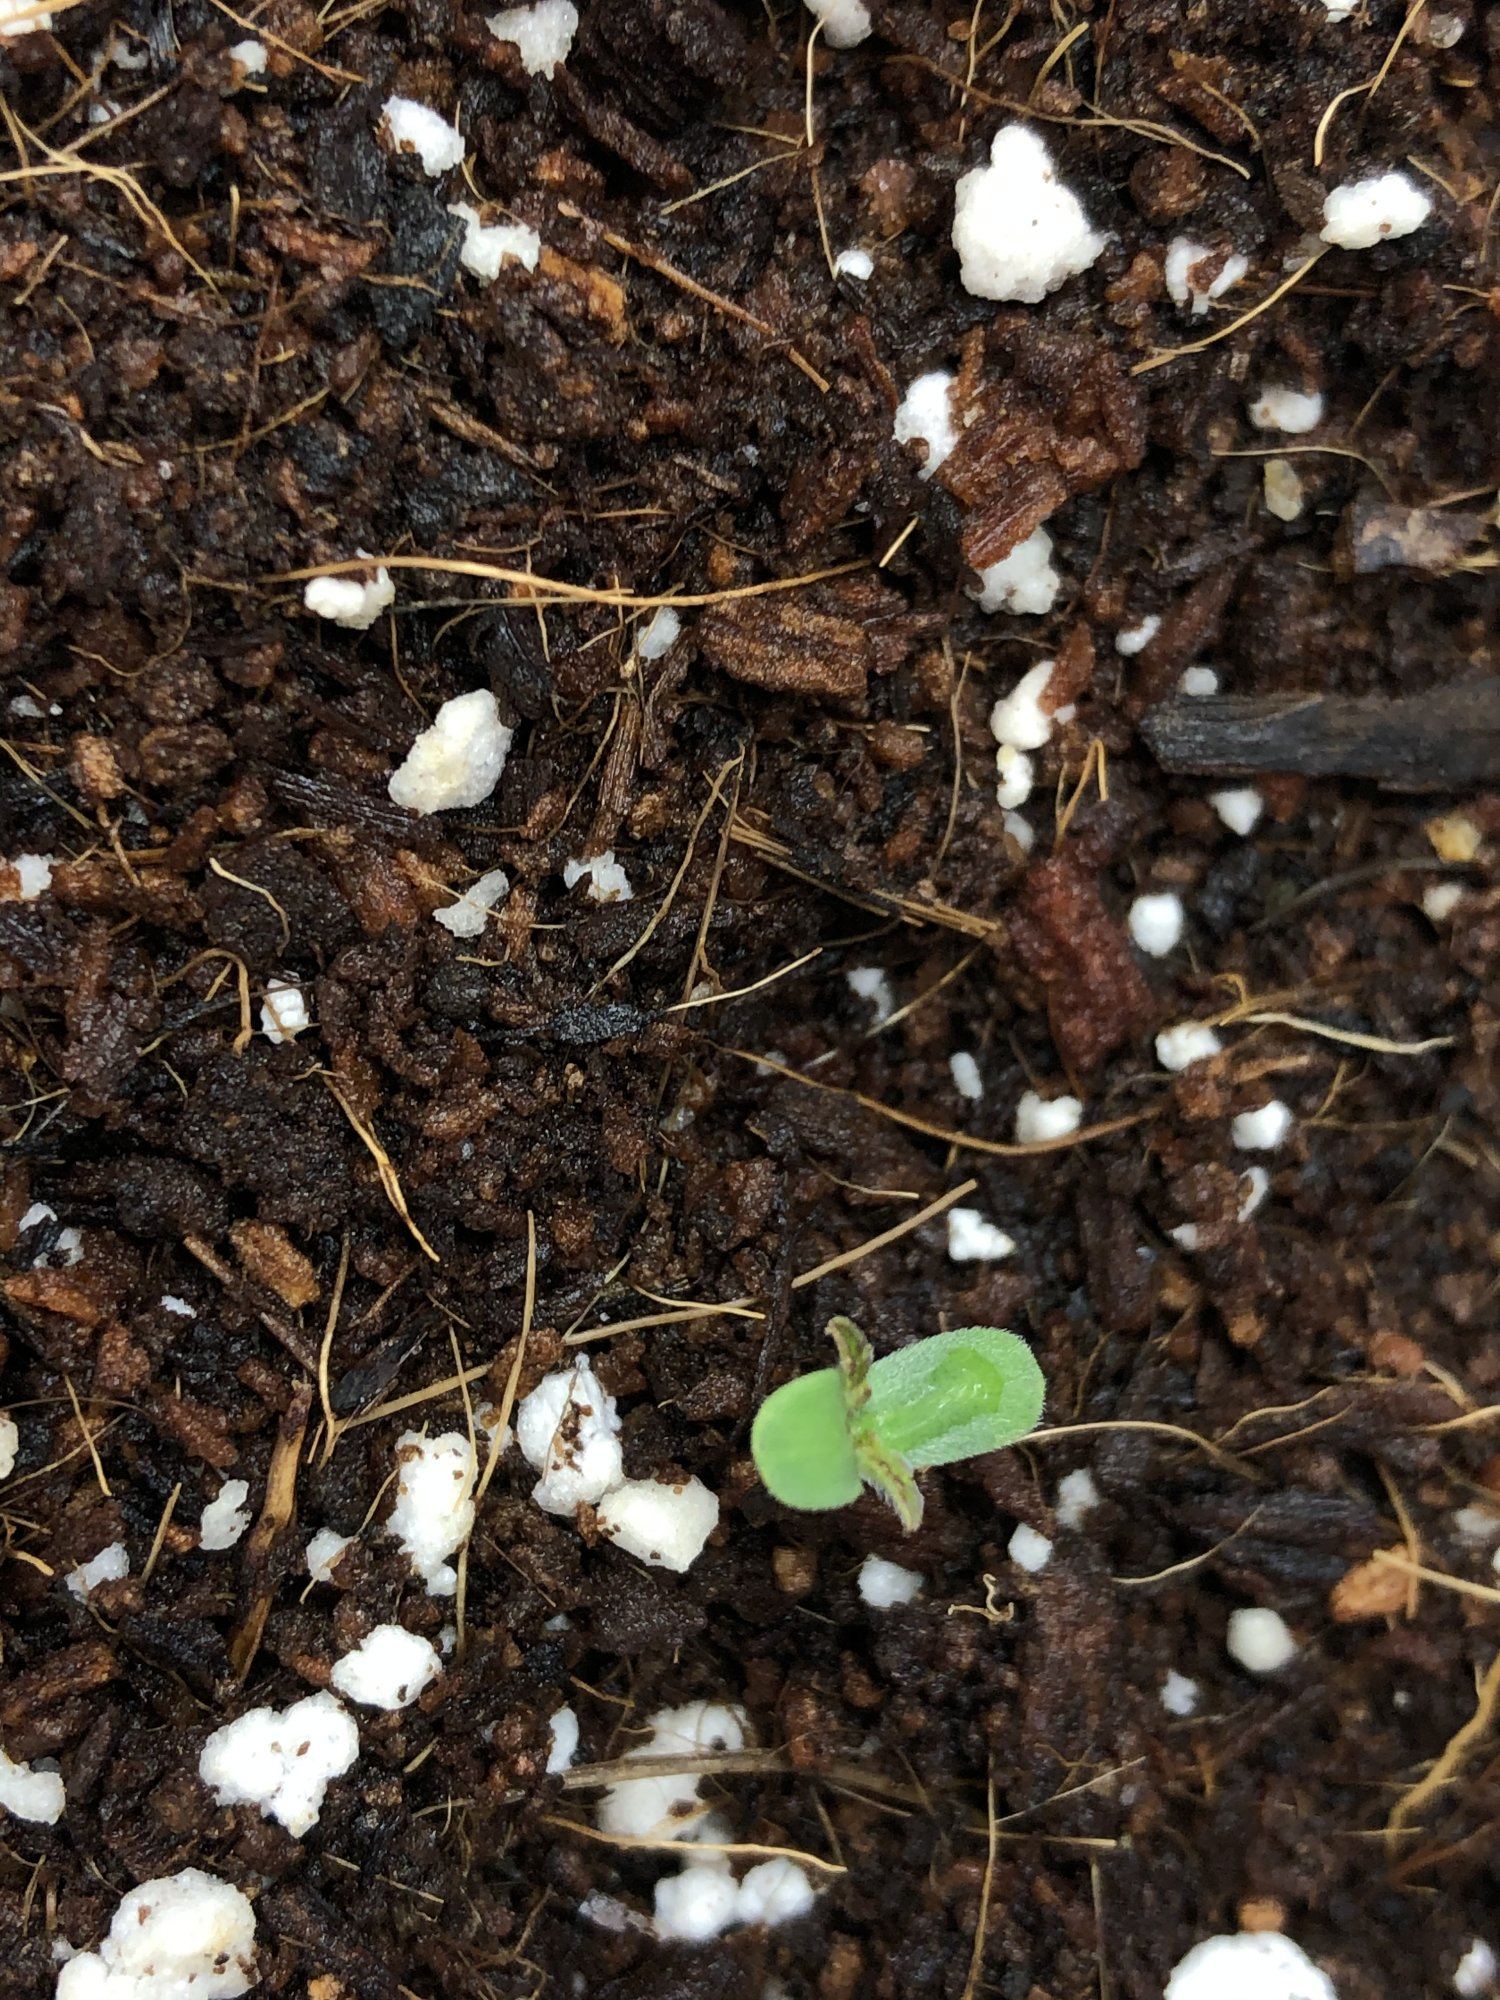 Not sure whats good with new seedling 4